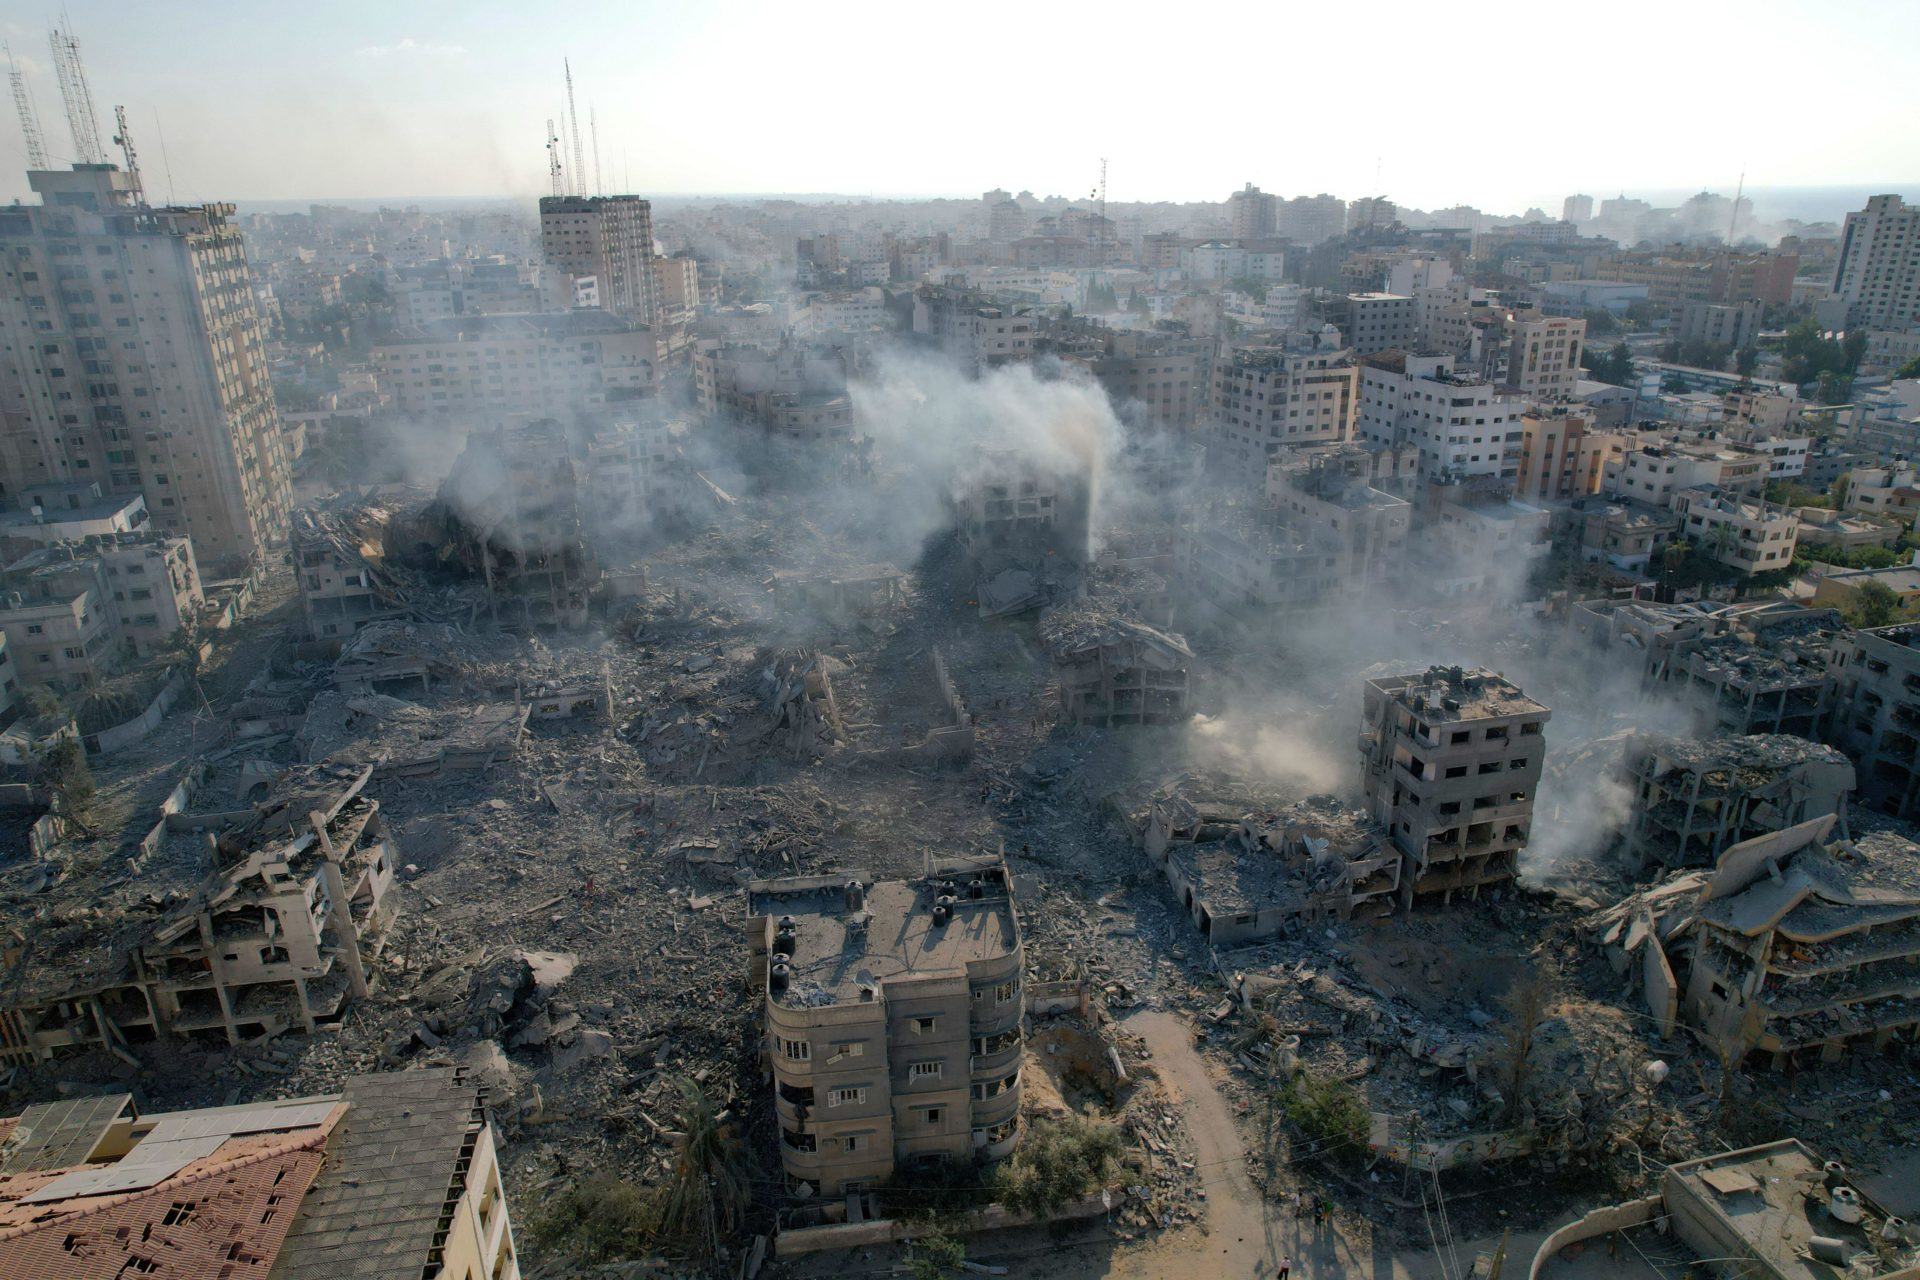 Widespread damage to buildings in Gaza City after Israeli bombardment, 10-10-23